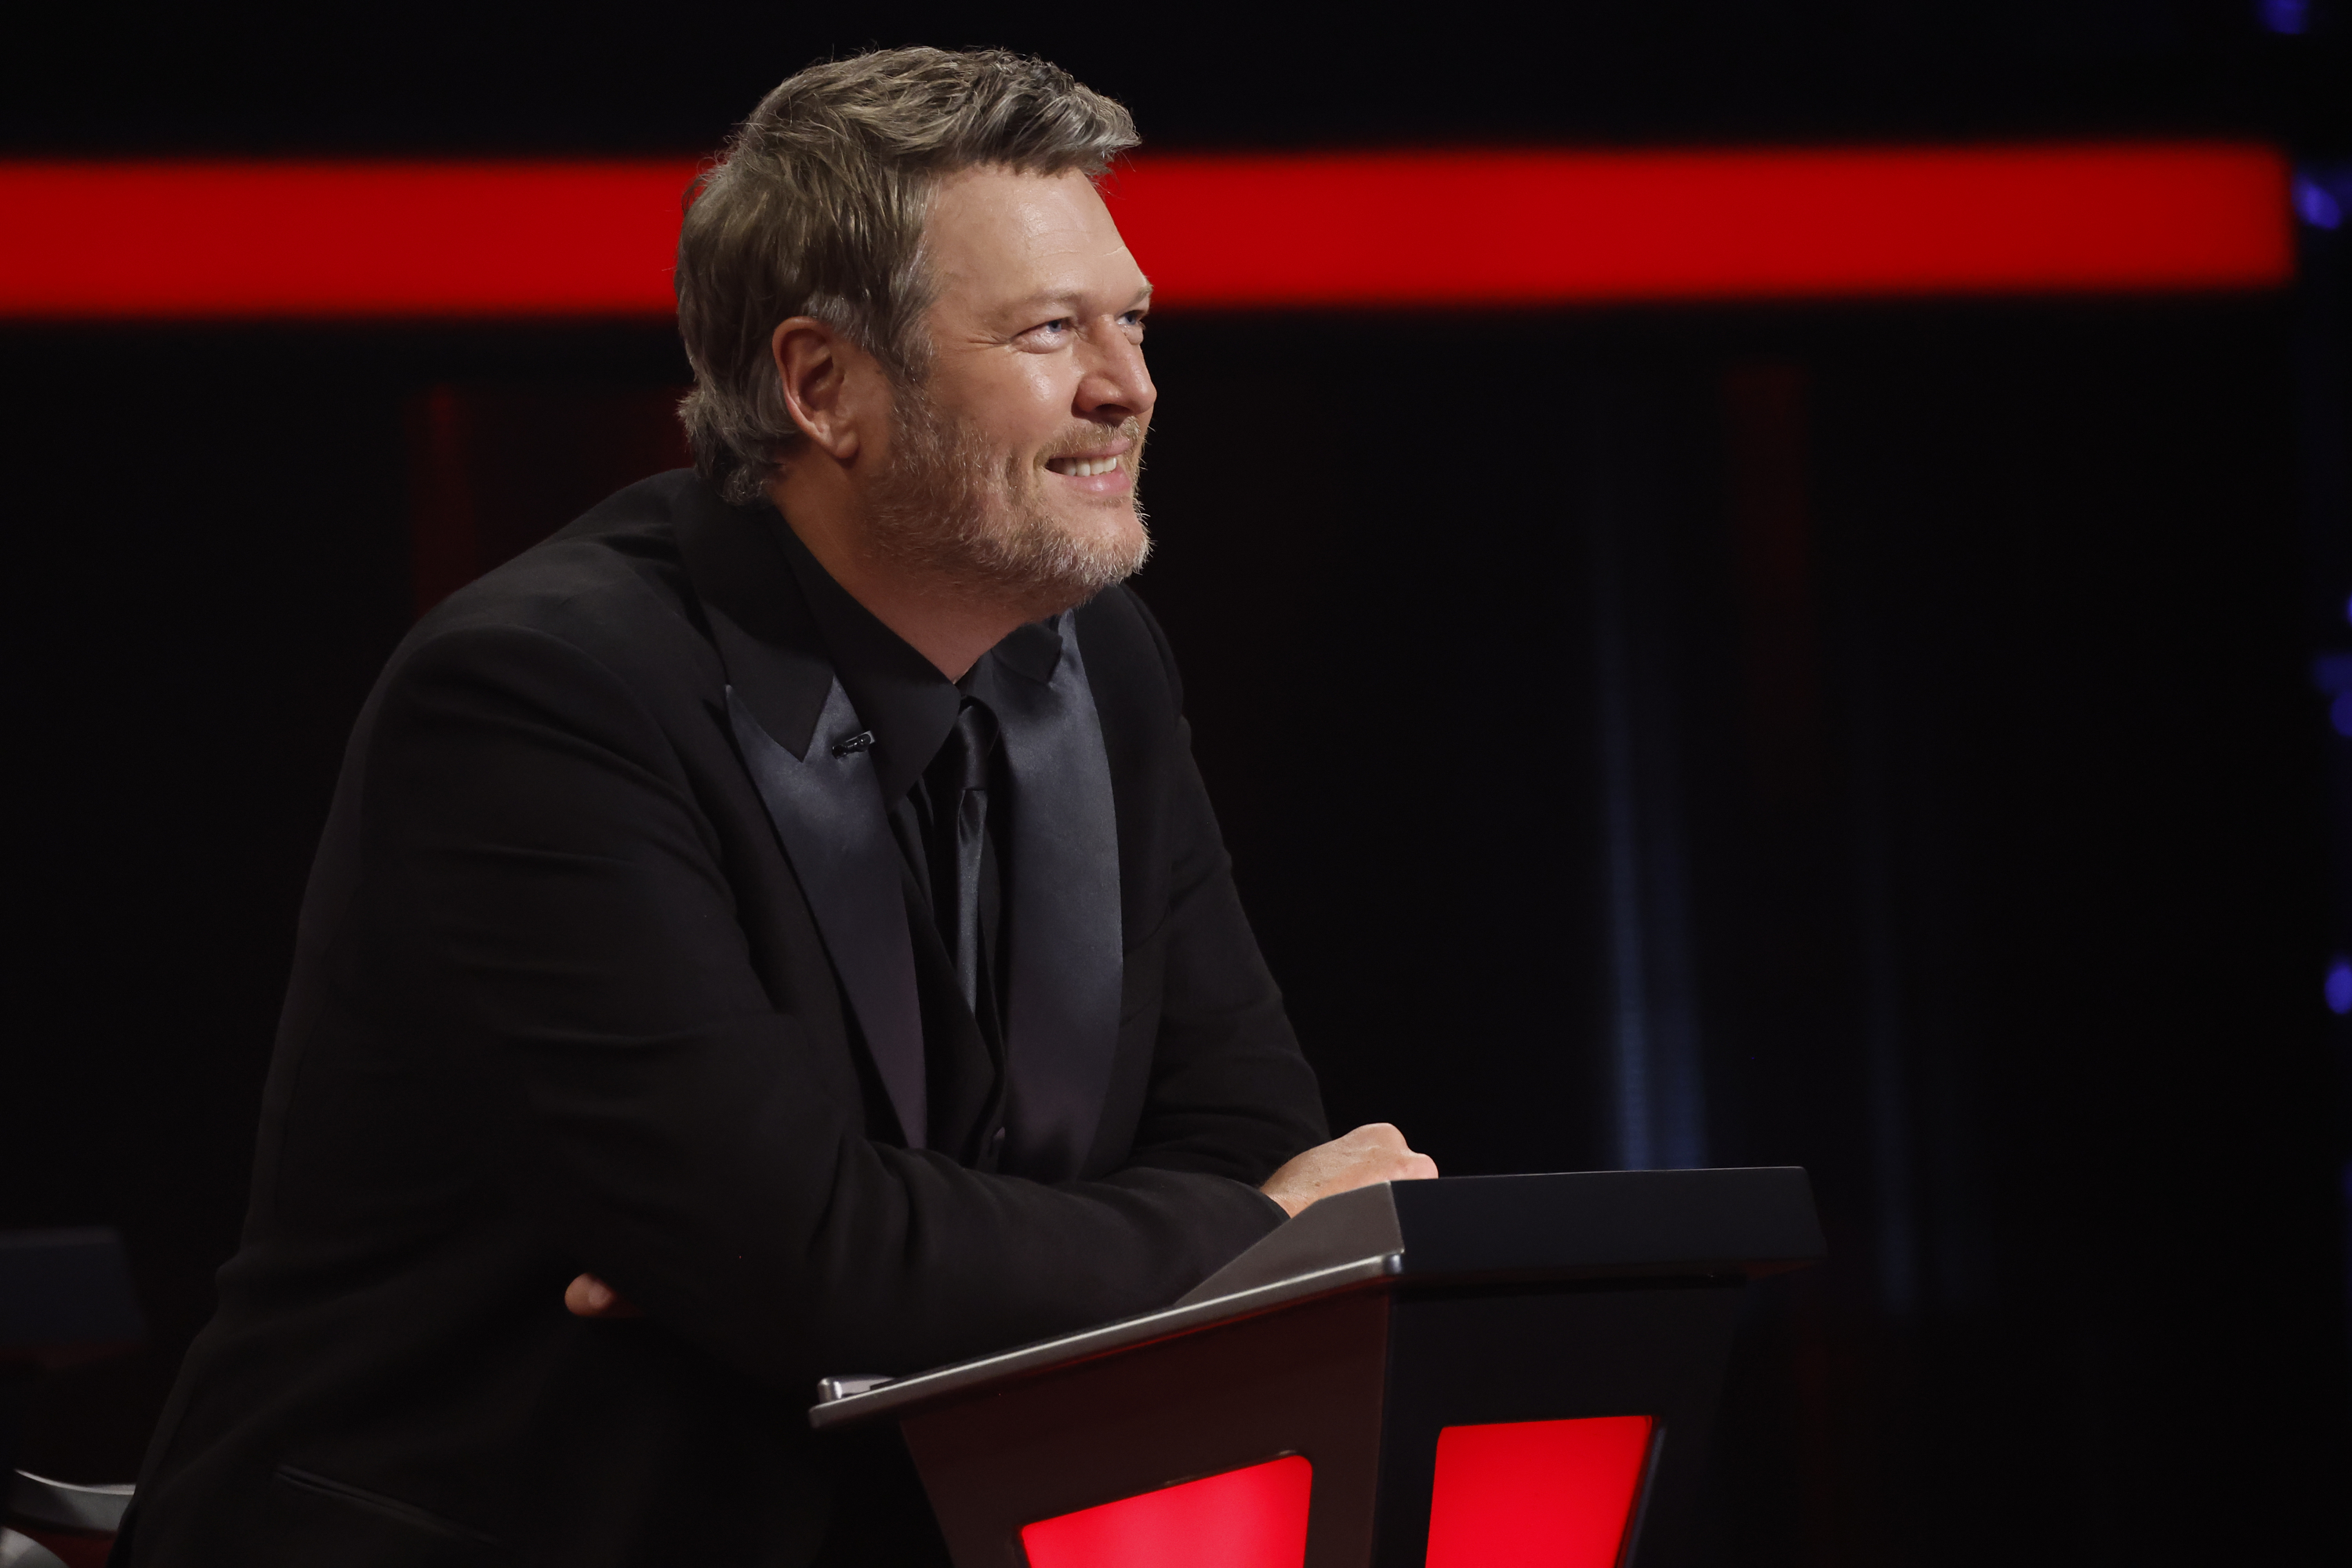 Blake Shelton on "The Voice" in May 2023 | Source: Getty Images